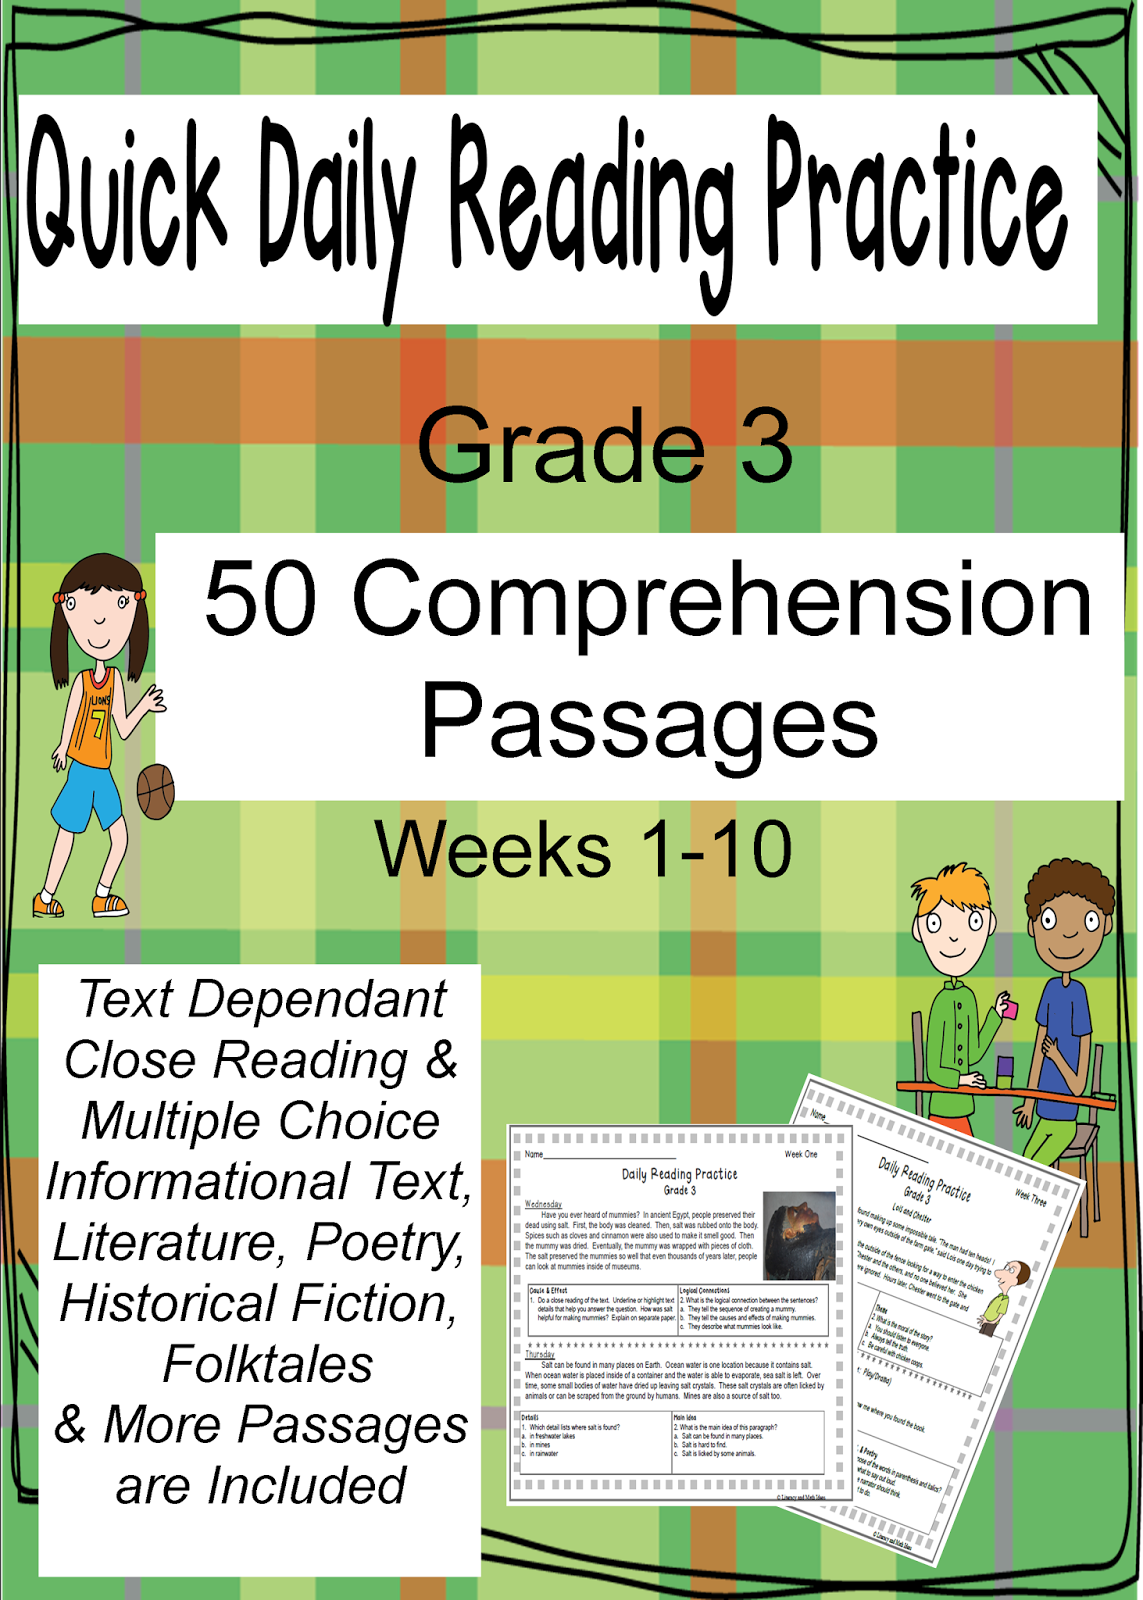 literacy-math-ideas-daily-reading-comprehension-practice-grade-3